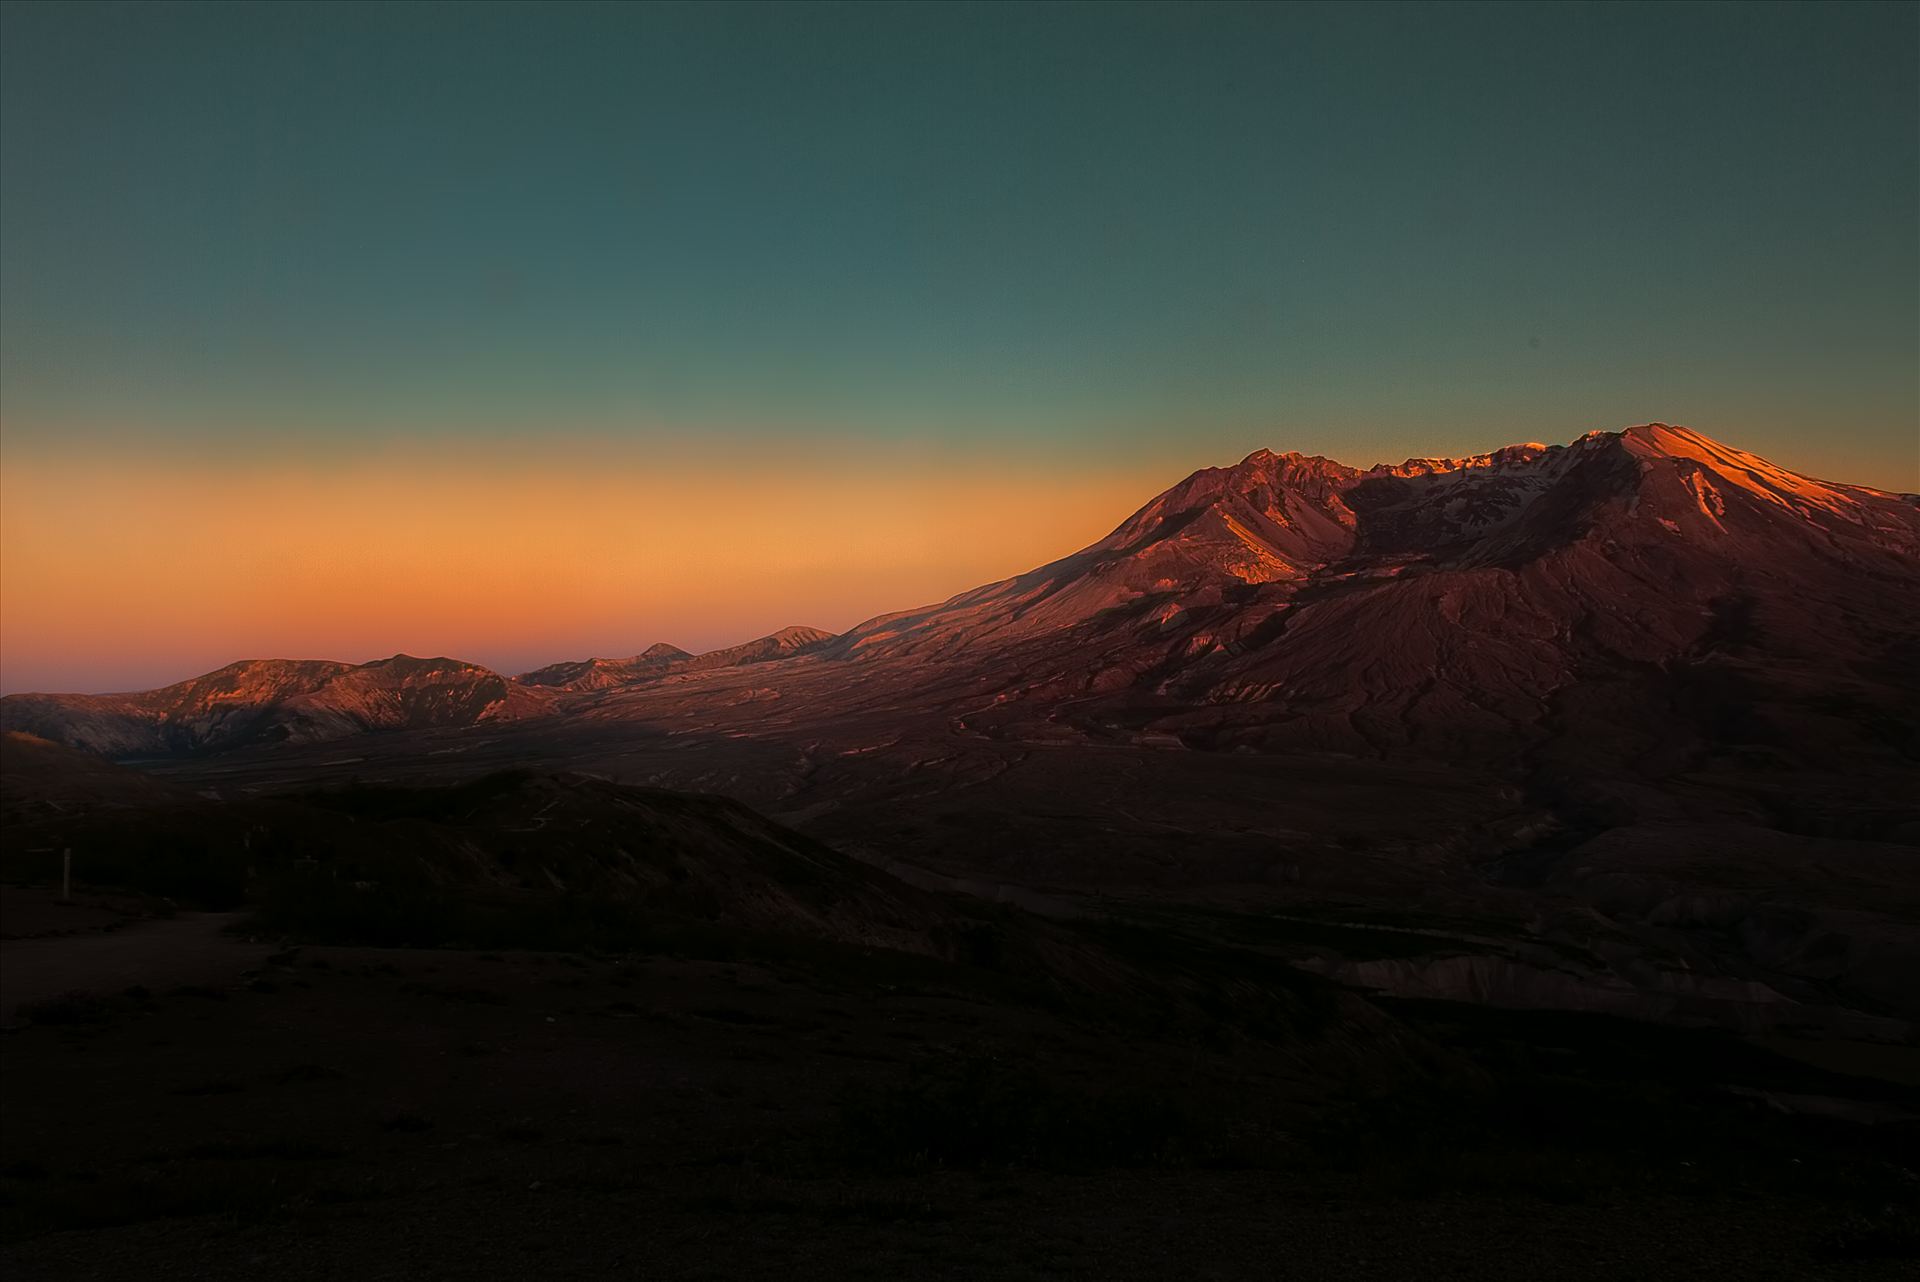 Mt. St. Helens at Sunset - Mt. St. Helens as the sun was setting to the right of the photo.  It was a magnificent scene. by Bear Conceptions Photography